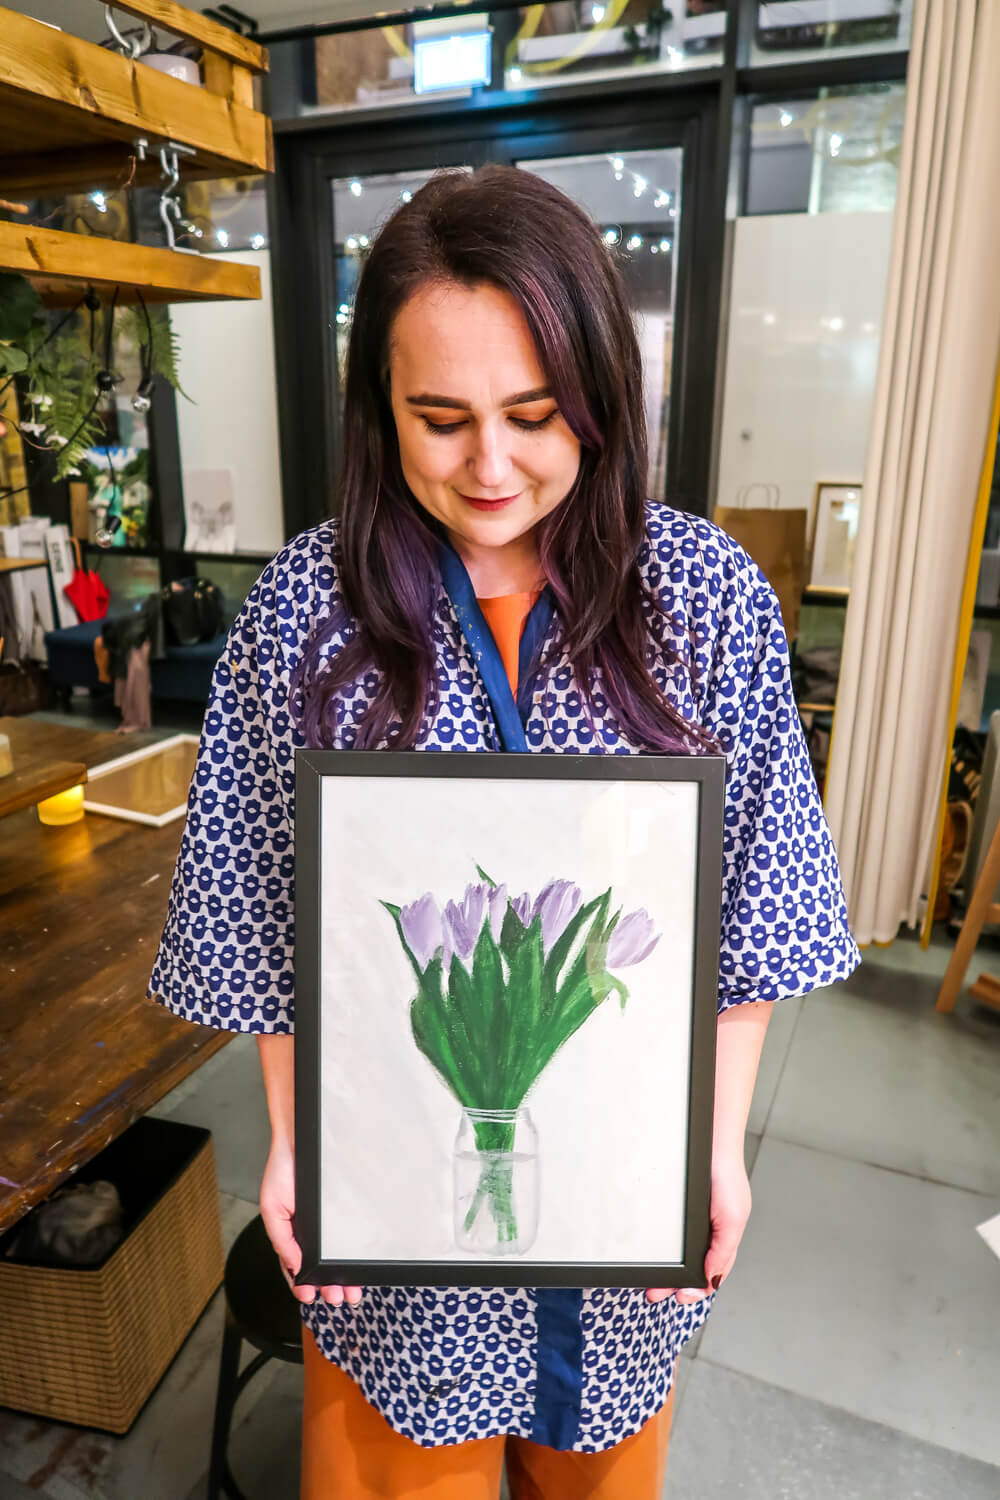 woman holds framed painting of tulips in both hands as she looks down proudly